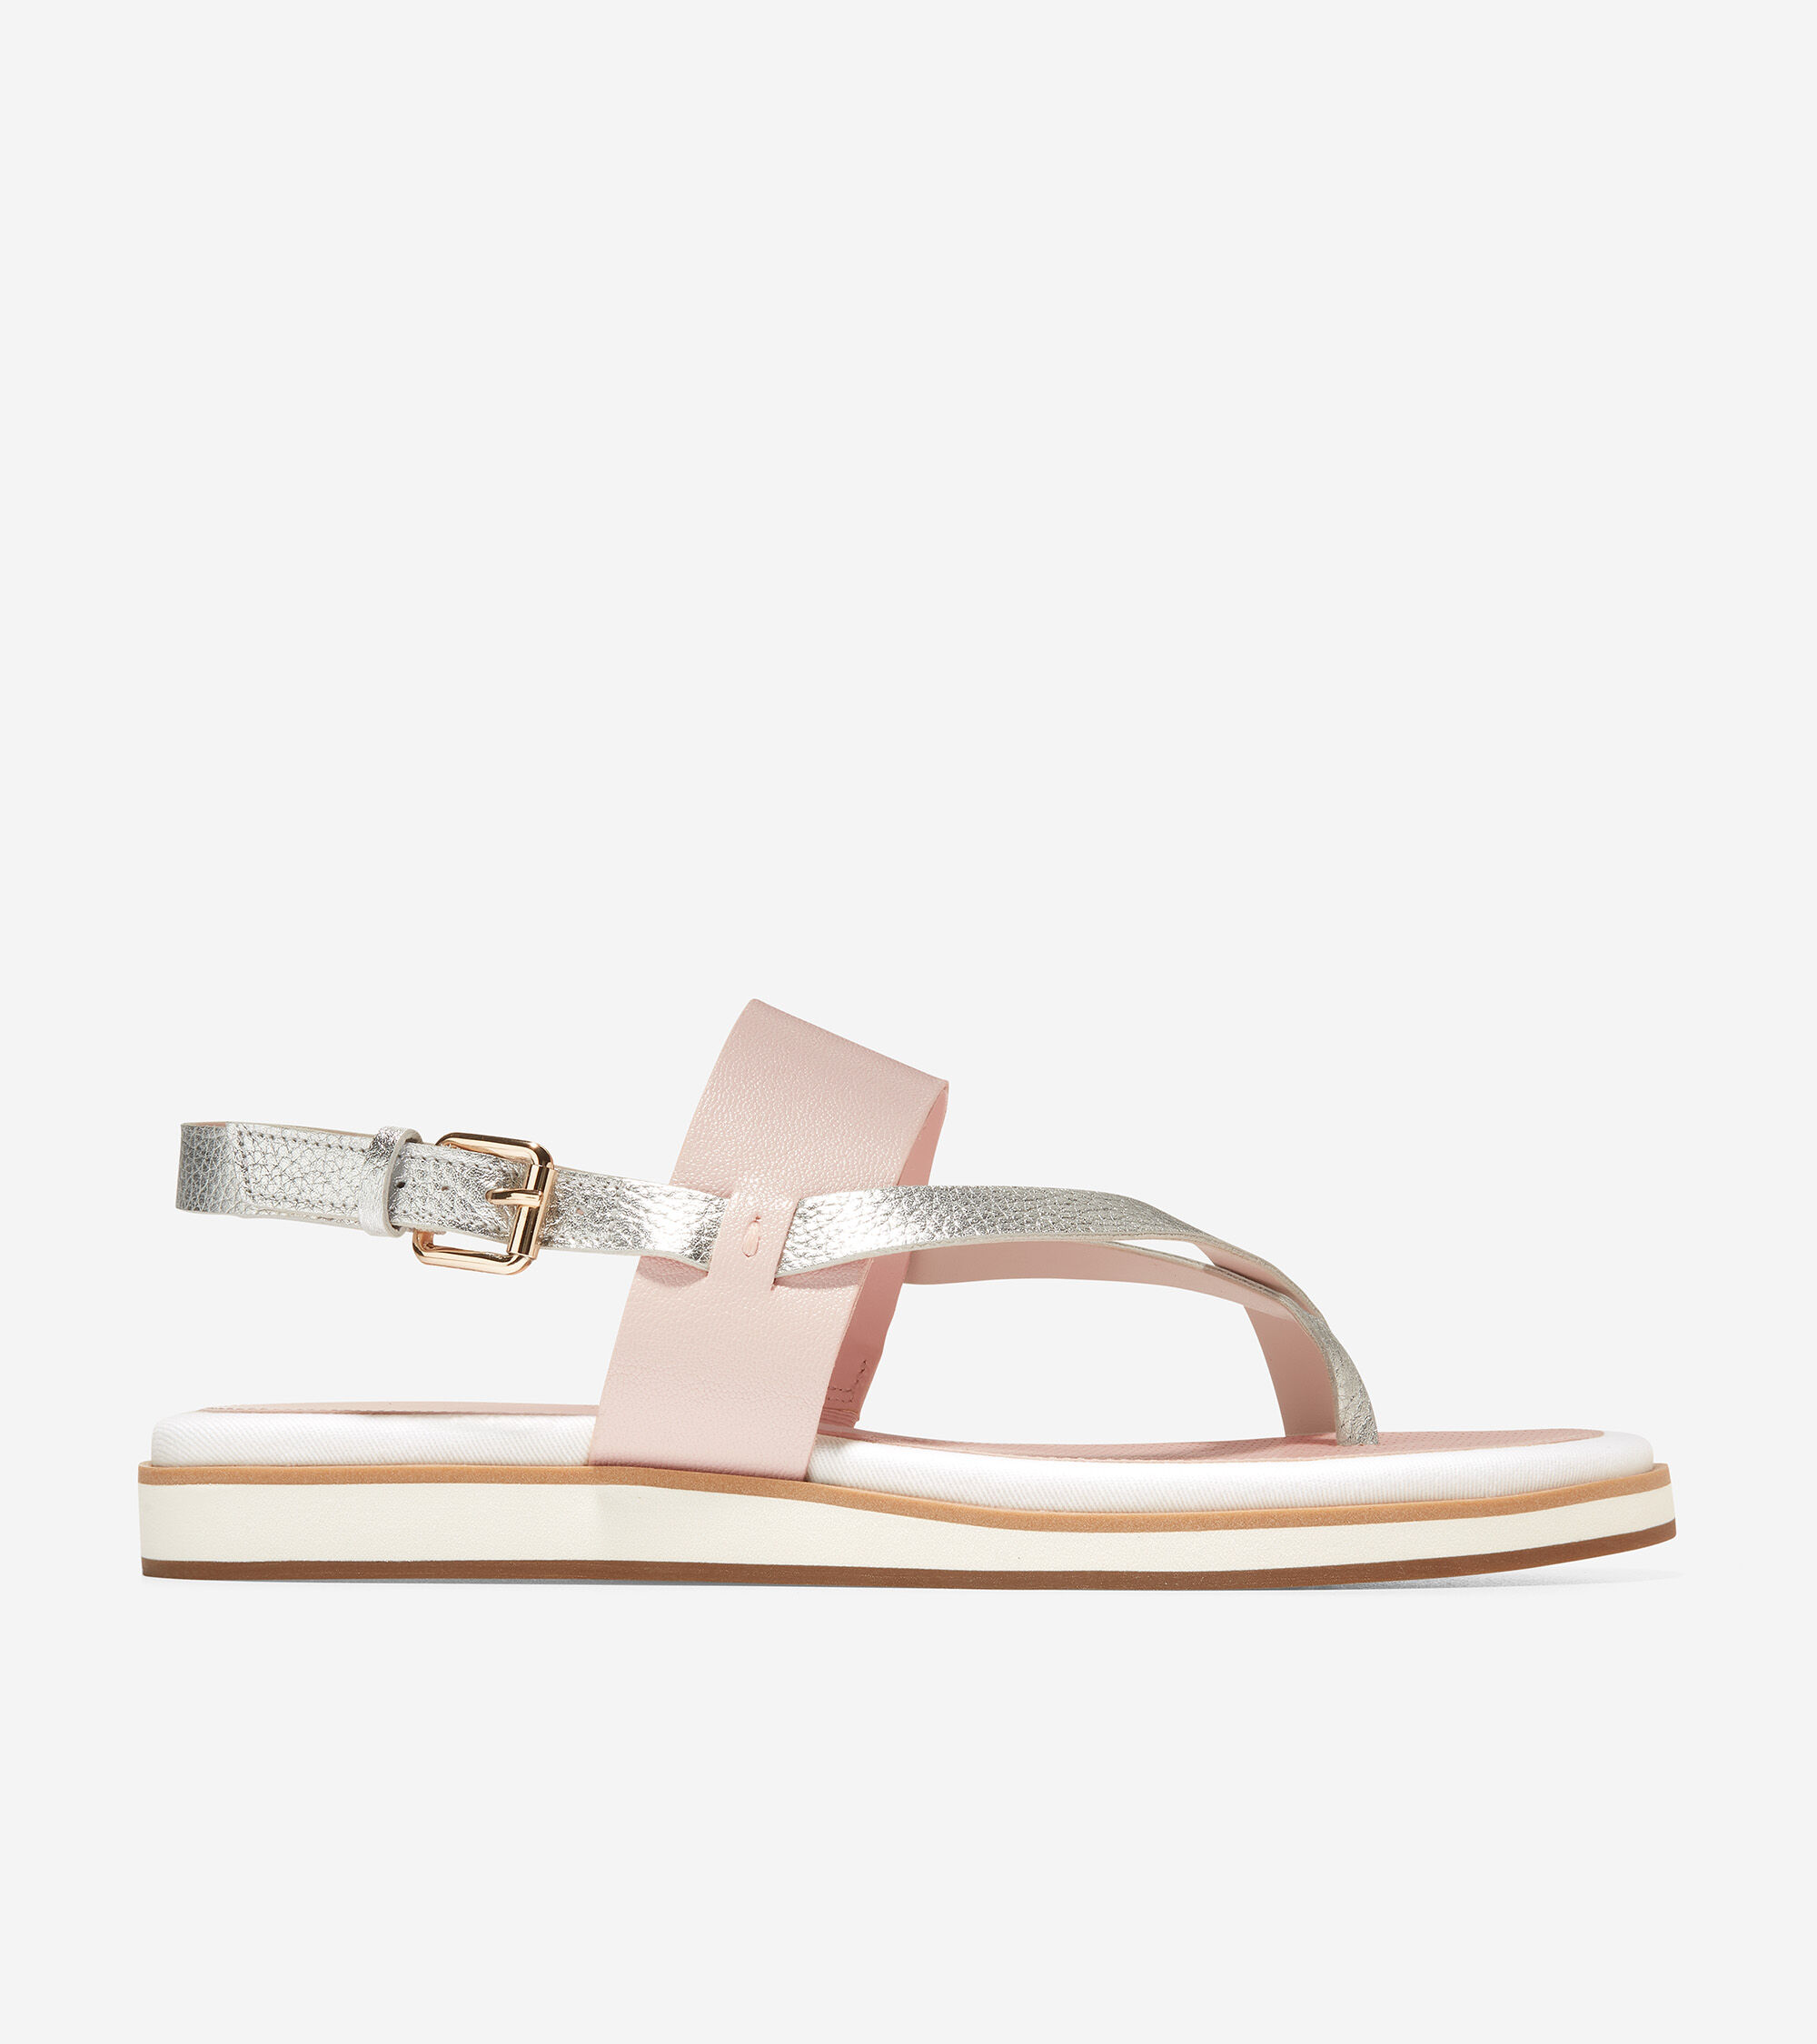 New COLE HAAN Womens ARIELLE SANDAL Tan/Rose Gold Leather Slide Sandals W15099 